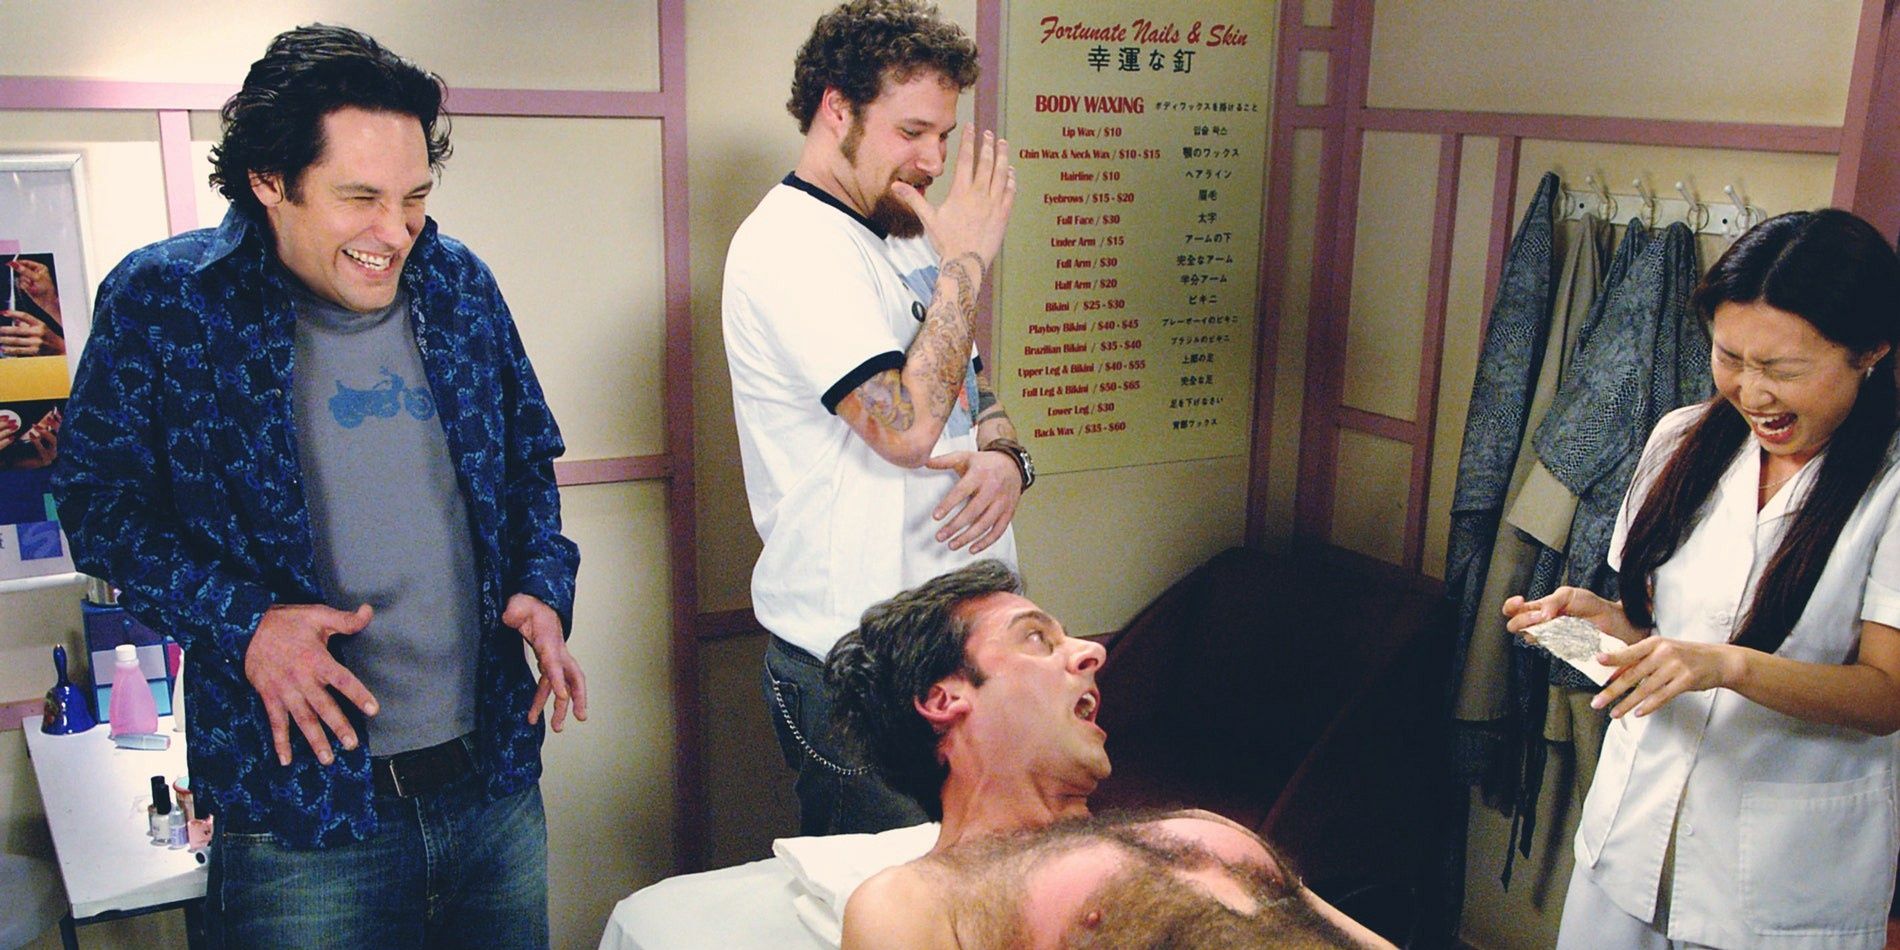 Steve Carrel has his chest waxed in The 40-Year-Old Virgin as Paul Rudd and Seth Rogen cringe at the pain